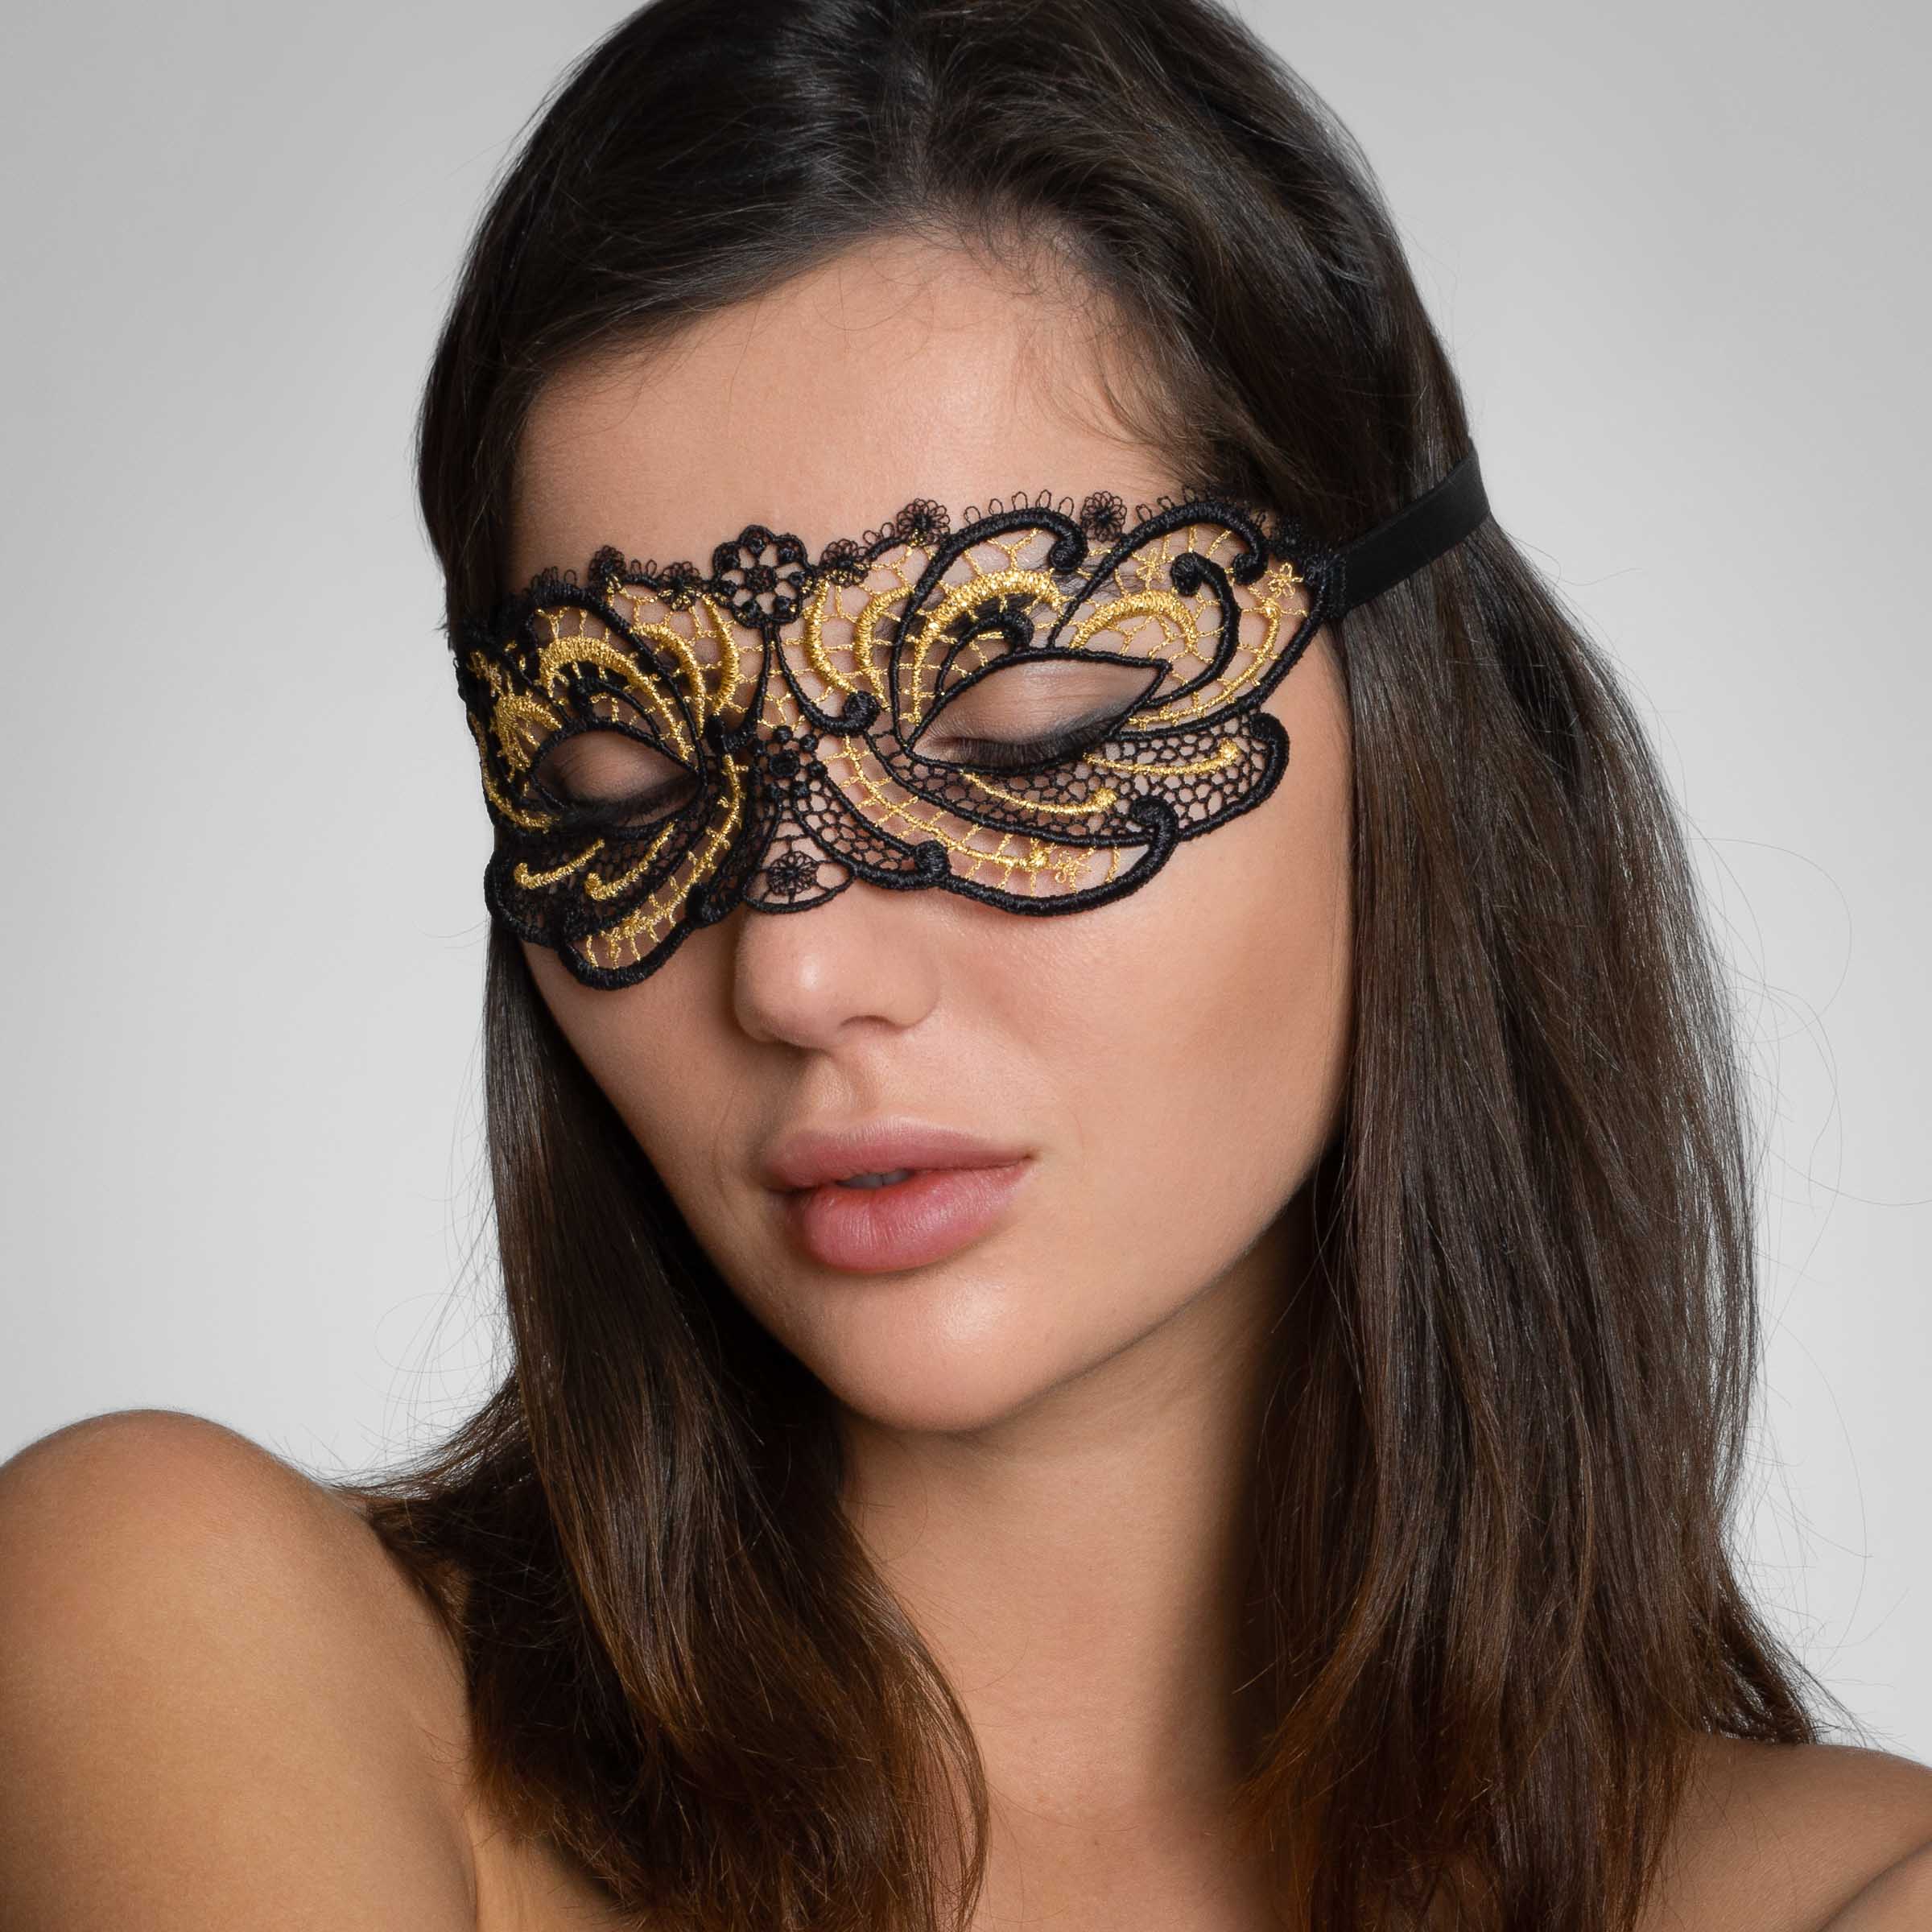 Queen of Love Mask - Black/Gold